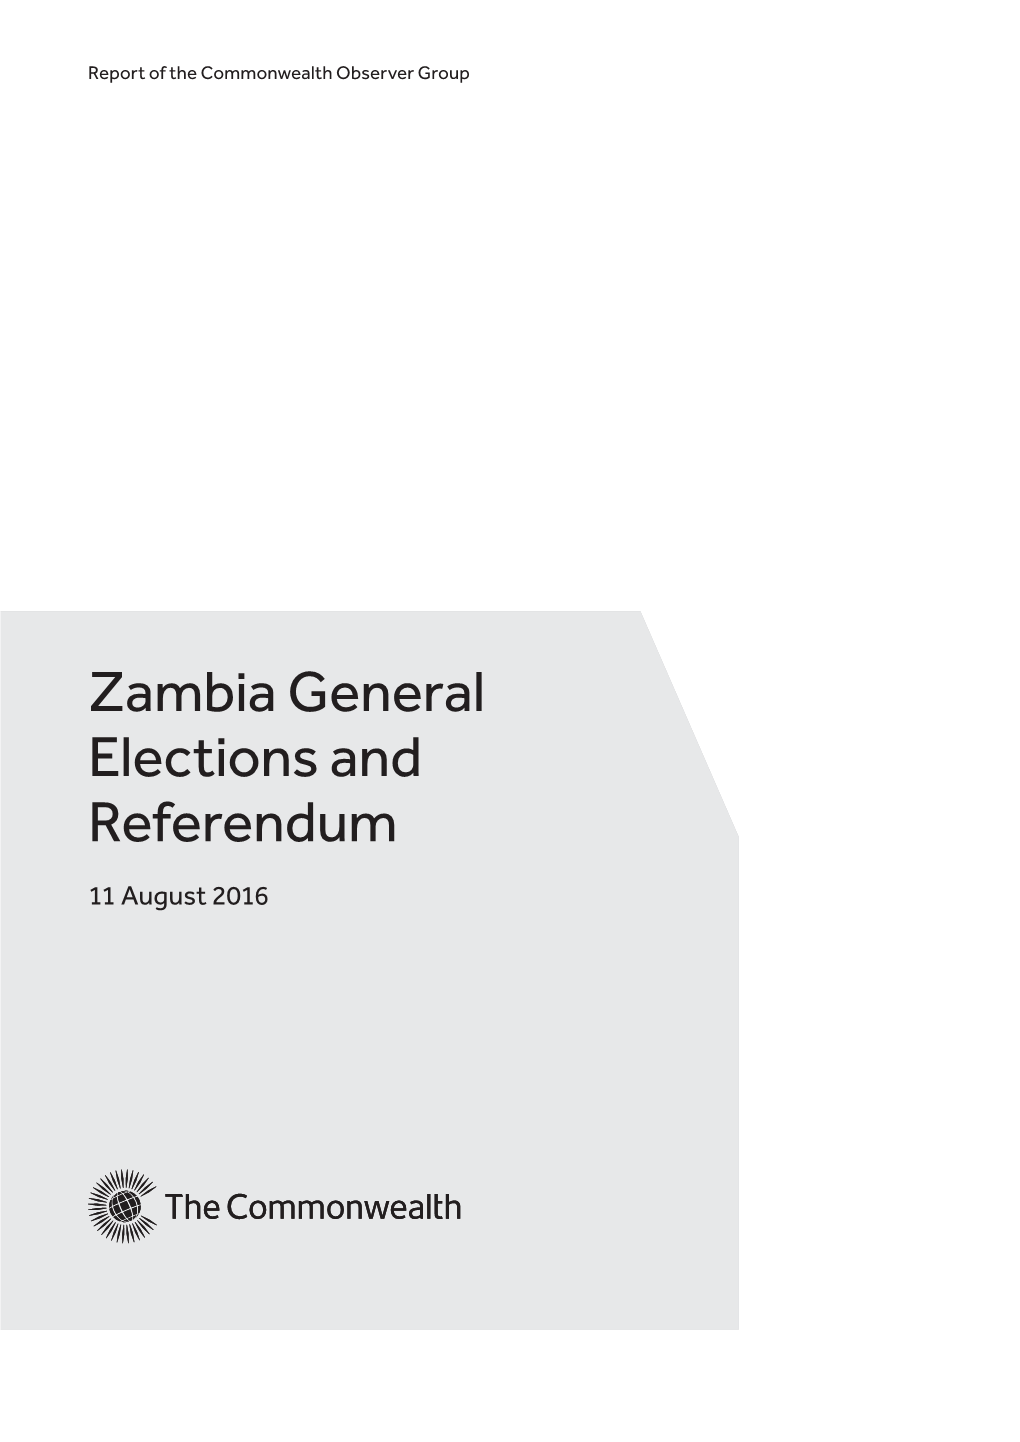 Zambia General Elections and Referendum